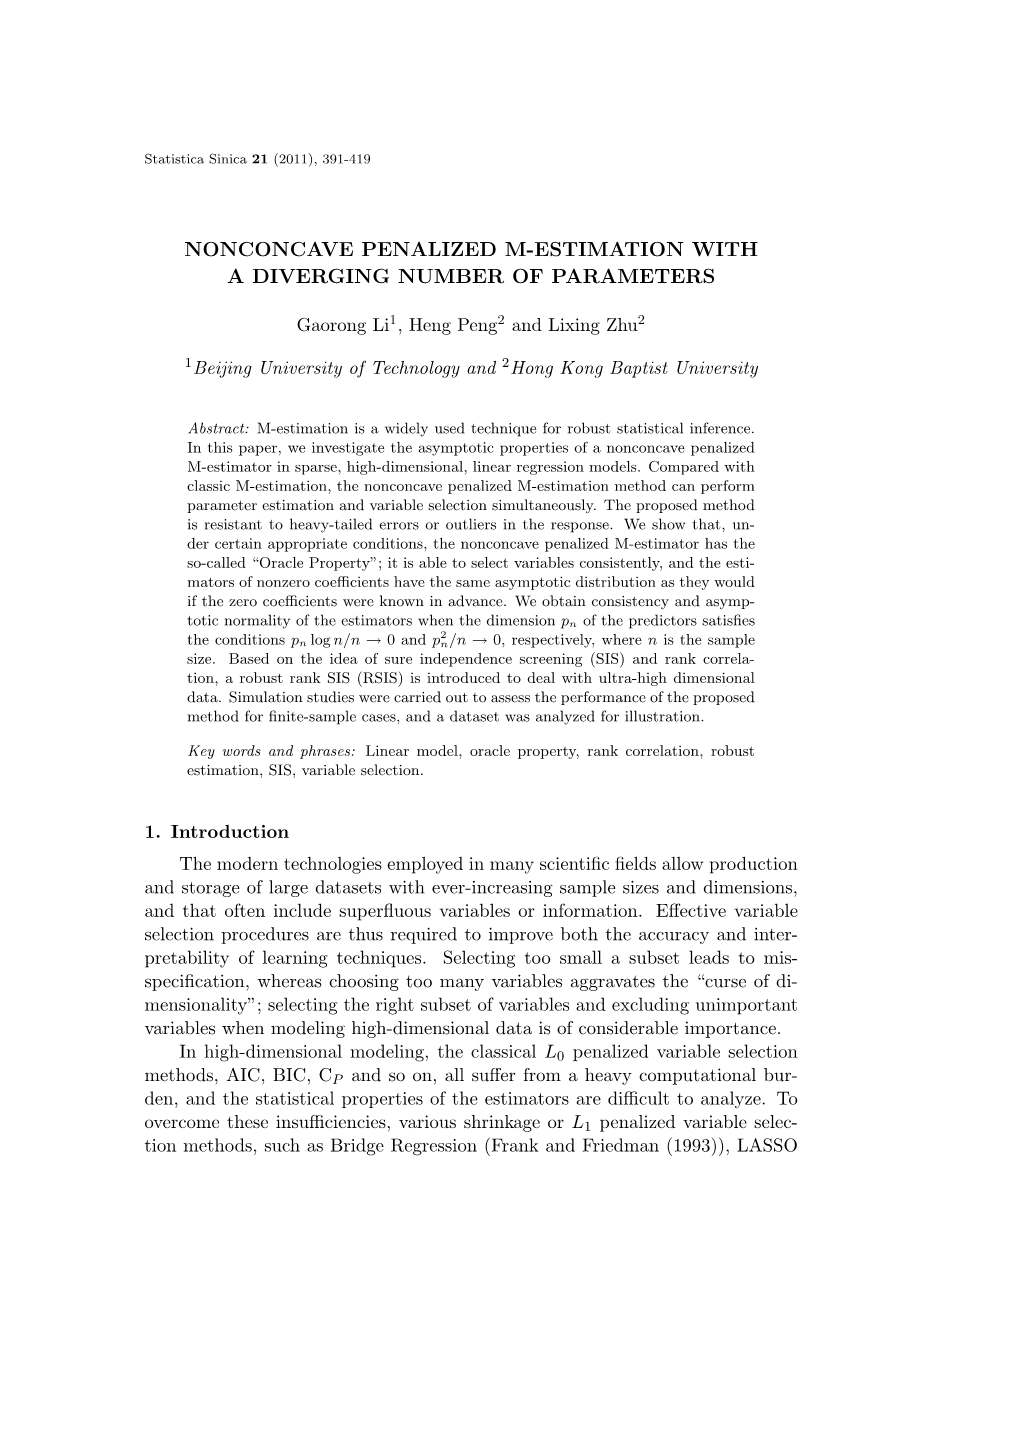 Nonconcave Penalized M-Estimation with a Diverging Number of Parameters